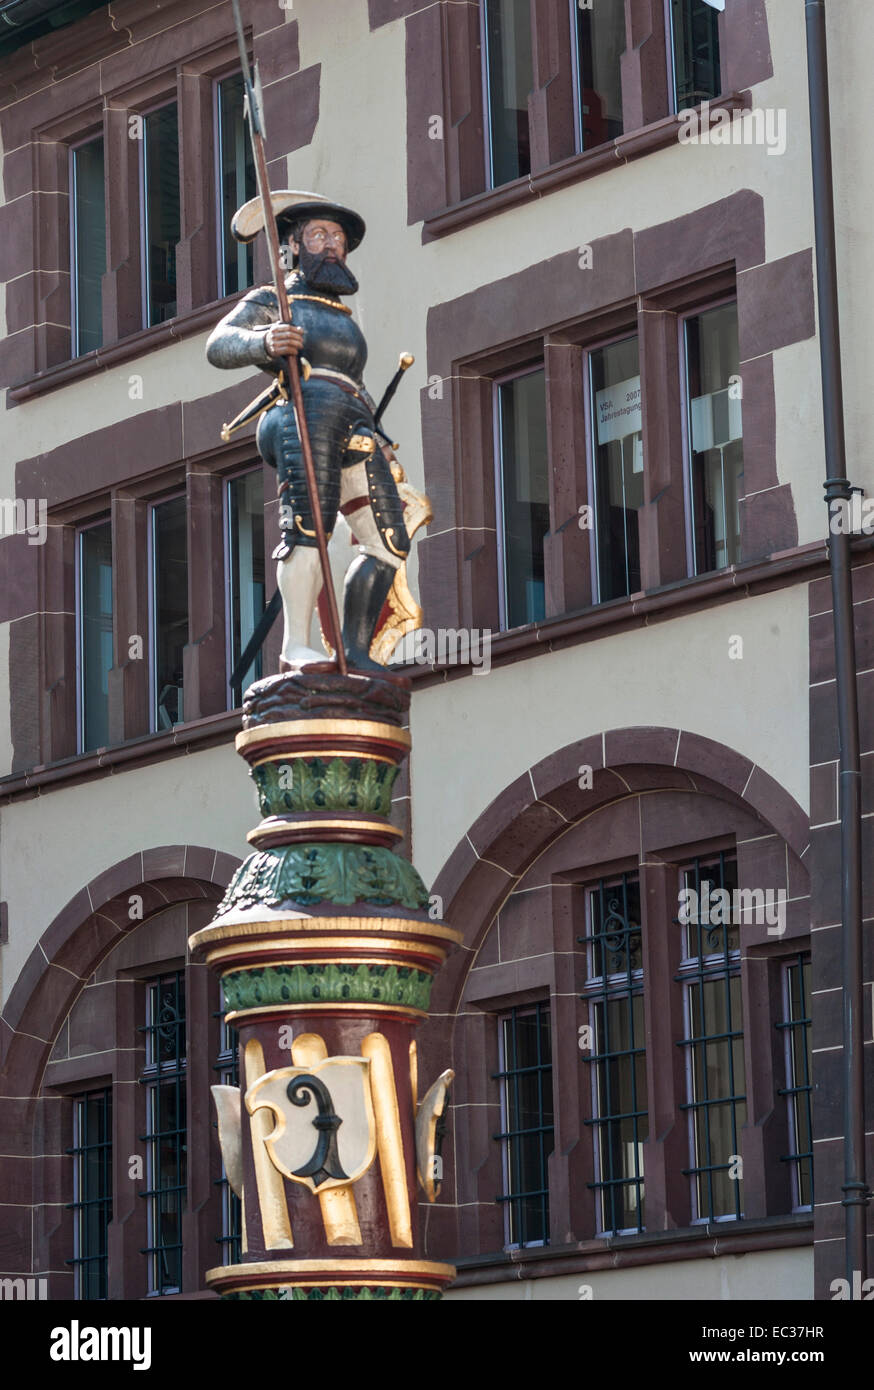 Switzerland, Basel, Statue of a Renaissance era soldier on a pedestal with Bishop the symbol of Basel at the bottom. Stock Photo